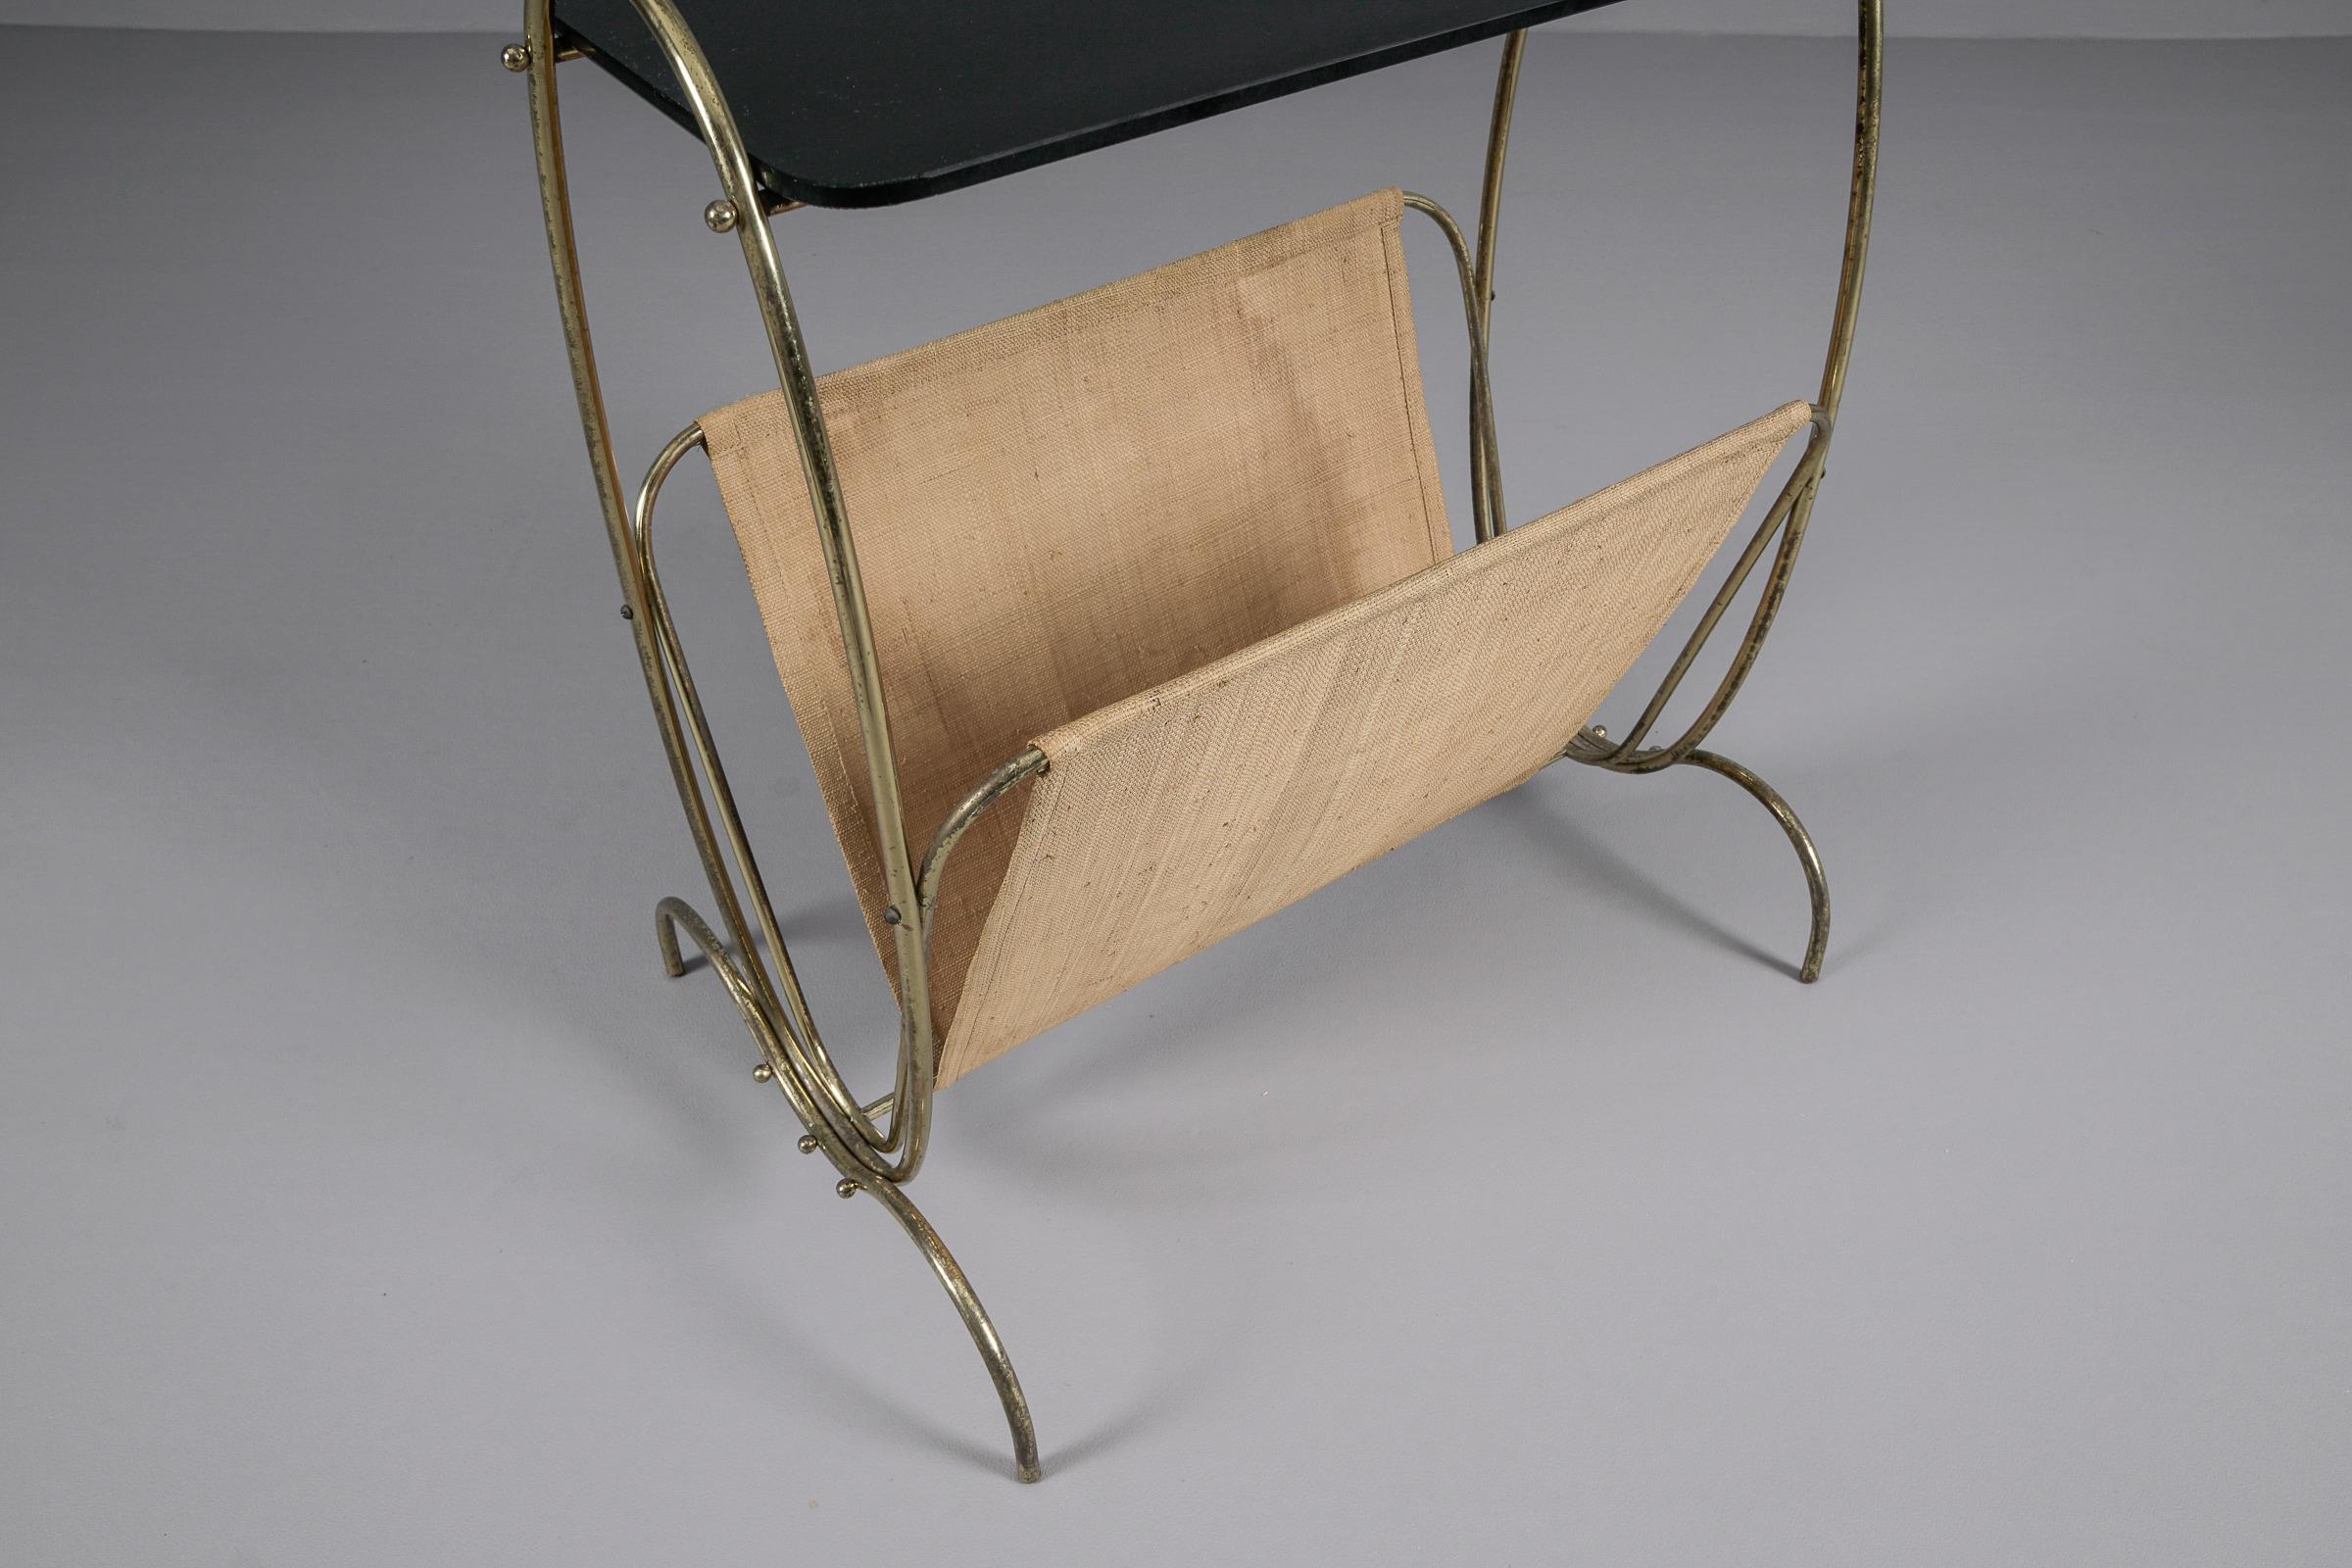 Black Glass and Brass Side Table and Magazine Rack, 1950s For Sale 6